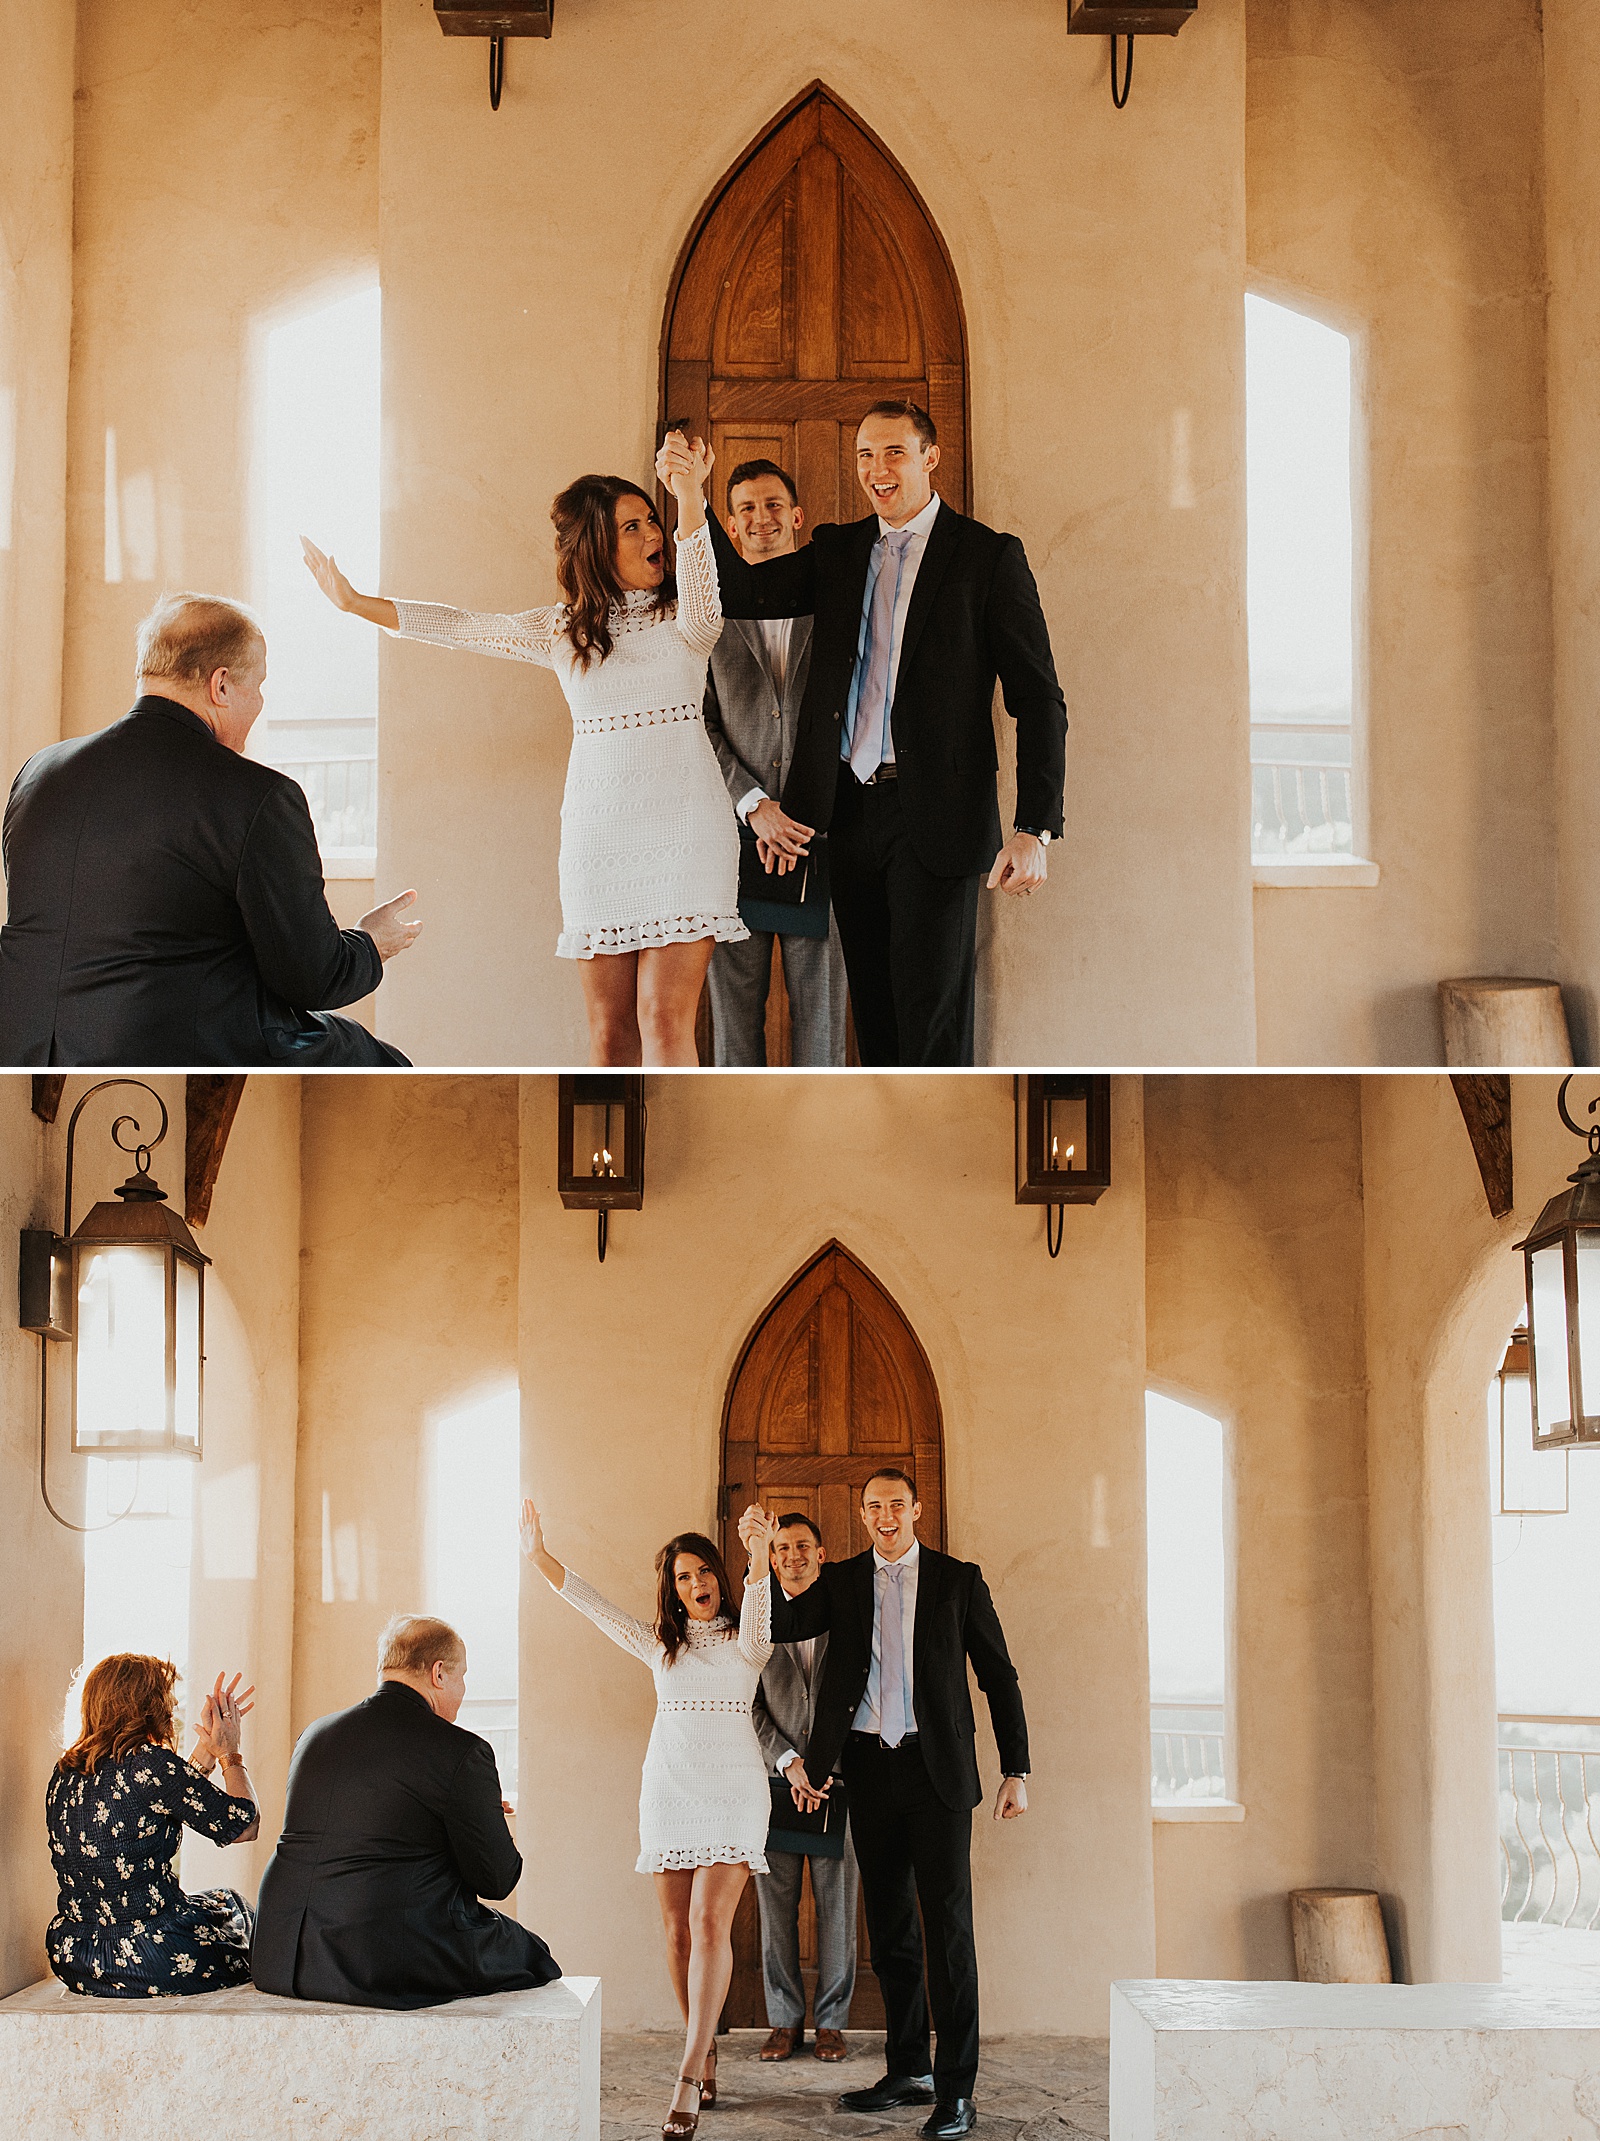 This Chapel Dulcinea wedding in Austin, TX was so special and intimate!